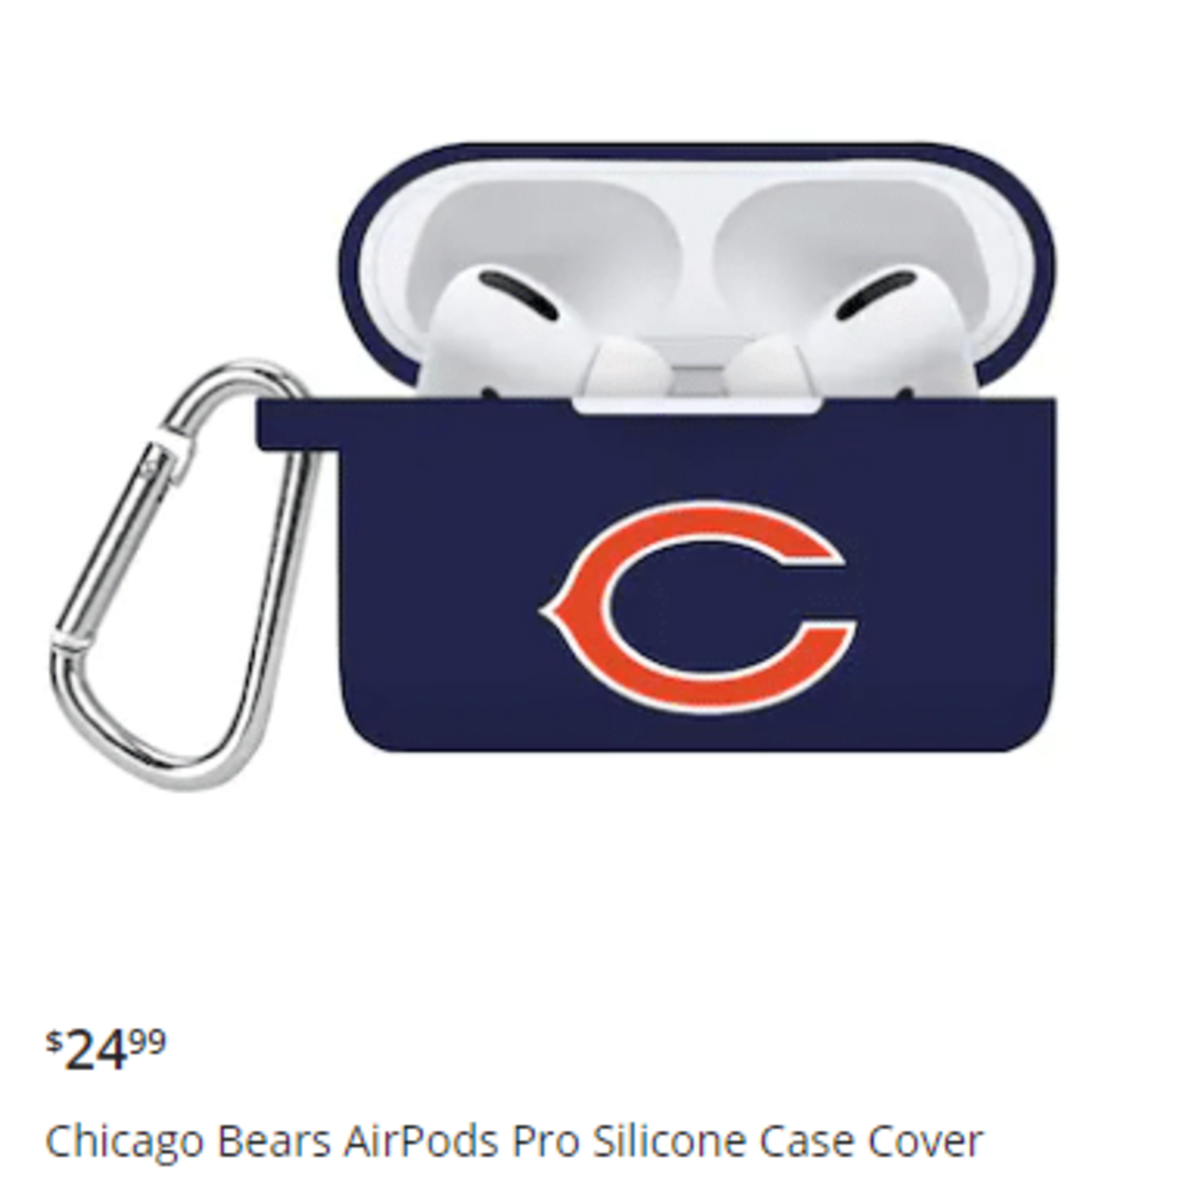 Chicago Bears air pods case Mother's Day gift idea last minute